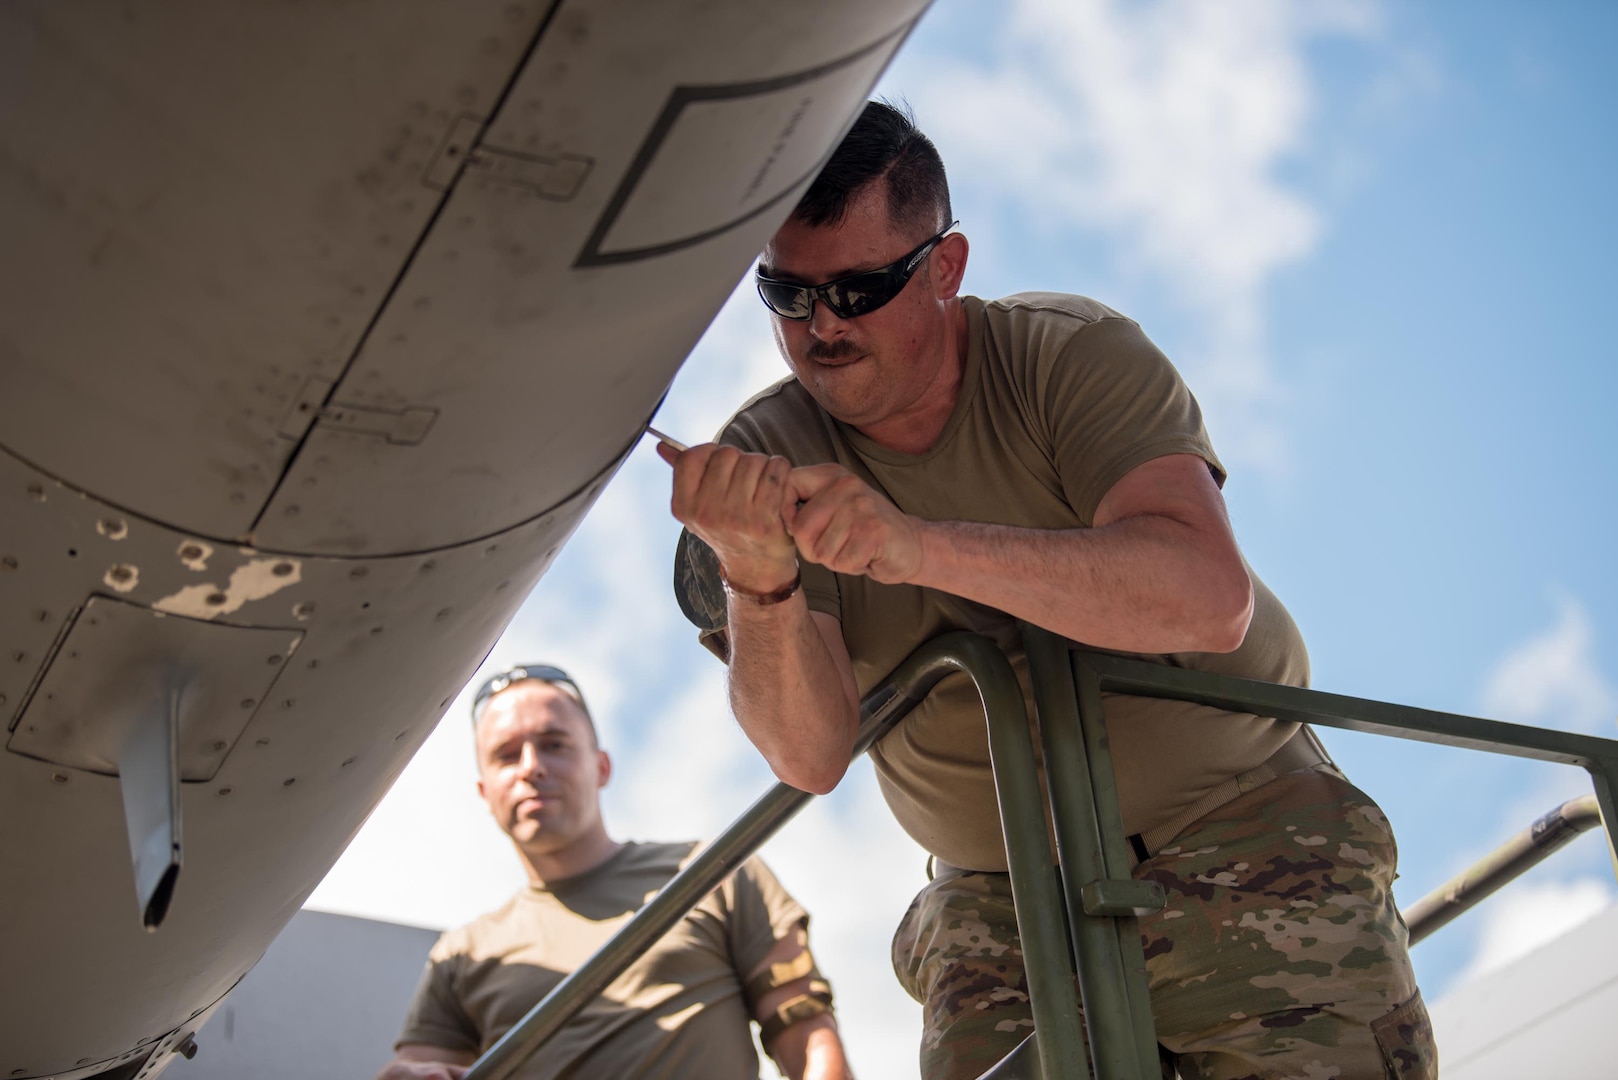 Master Sgt. Chuck Rodgers, right, a propulsion elements supervisor from the Kentucky Air National Guard’s 123rd Maintenance Squadron, and Staff Sgt. Mike Hasson, an aerospace maintenance craftsman from the same unit, install engine panels on a C-130 Hercules at Muñiz Air National Guard Base in Carolina, Puerto Rico, June 13, 2021, as part of Maintenance University. More than 130 Airmen from the Kentucky Air Guard’s 123rd Airlift Wing trained on career-specific proficiencies during the intensive week-long course.